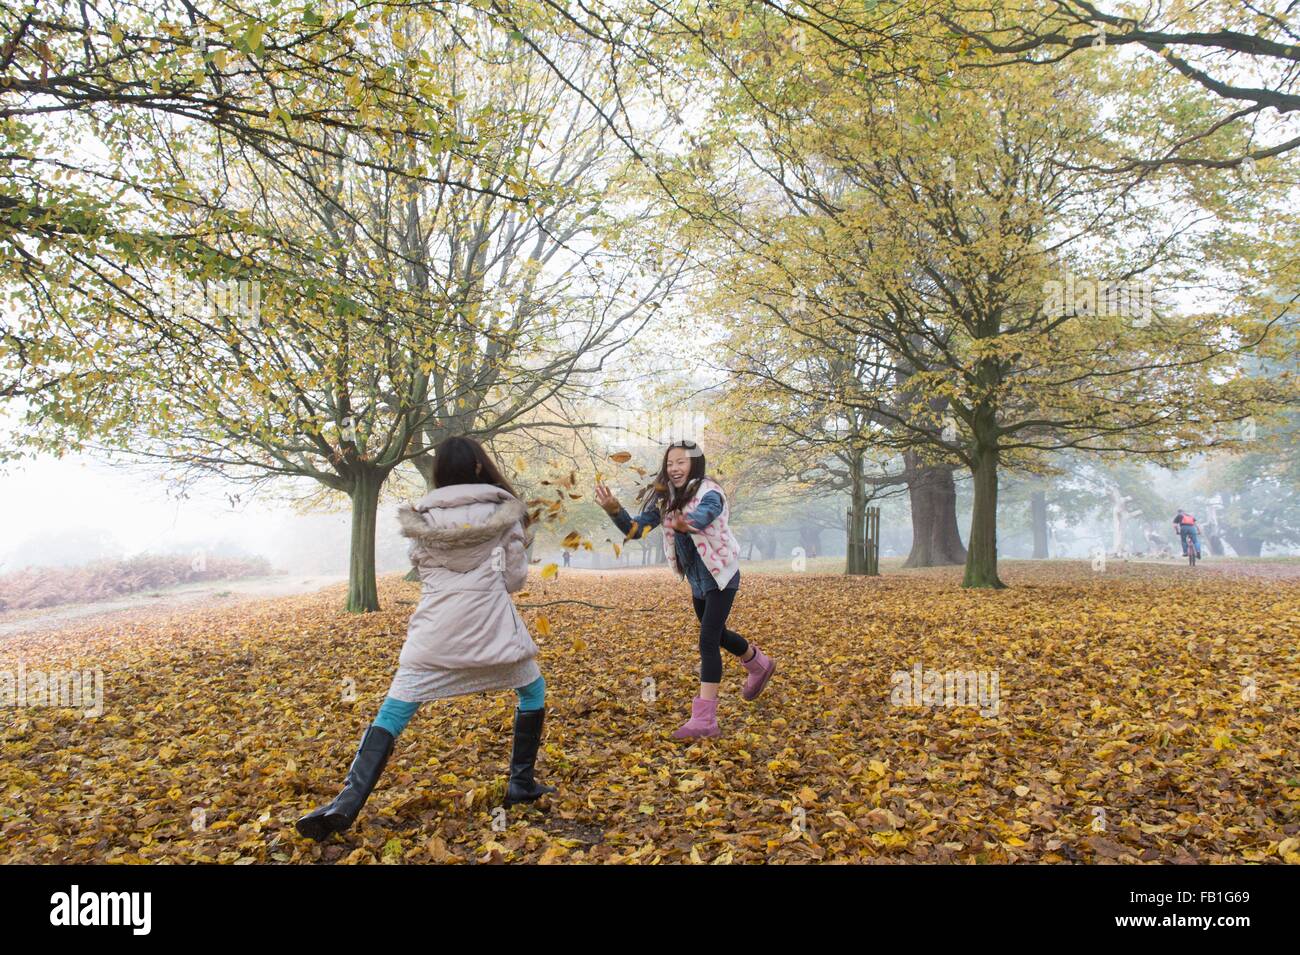 Two young girls playing, throwing leaves, in forest, autumn Stock Photo